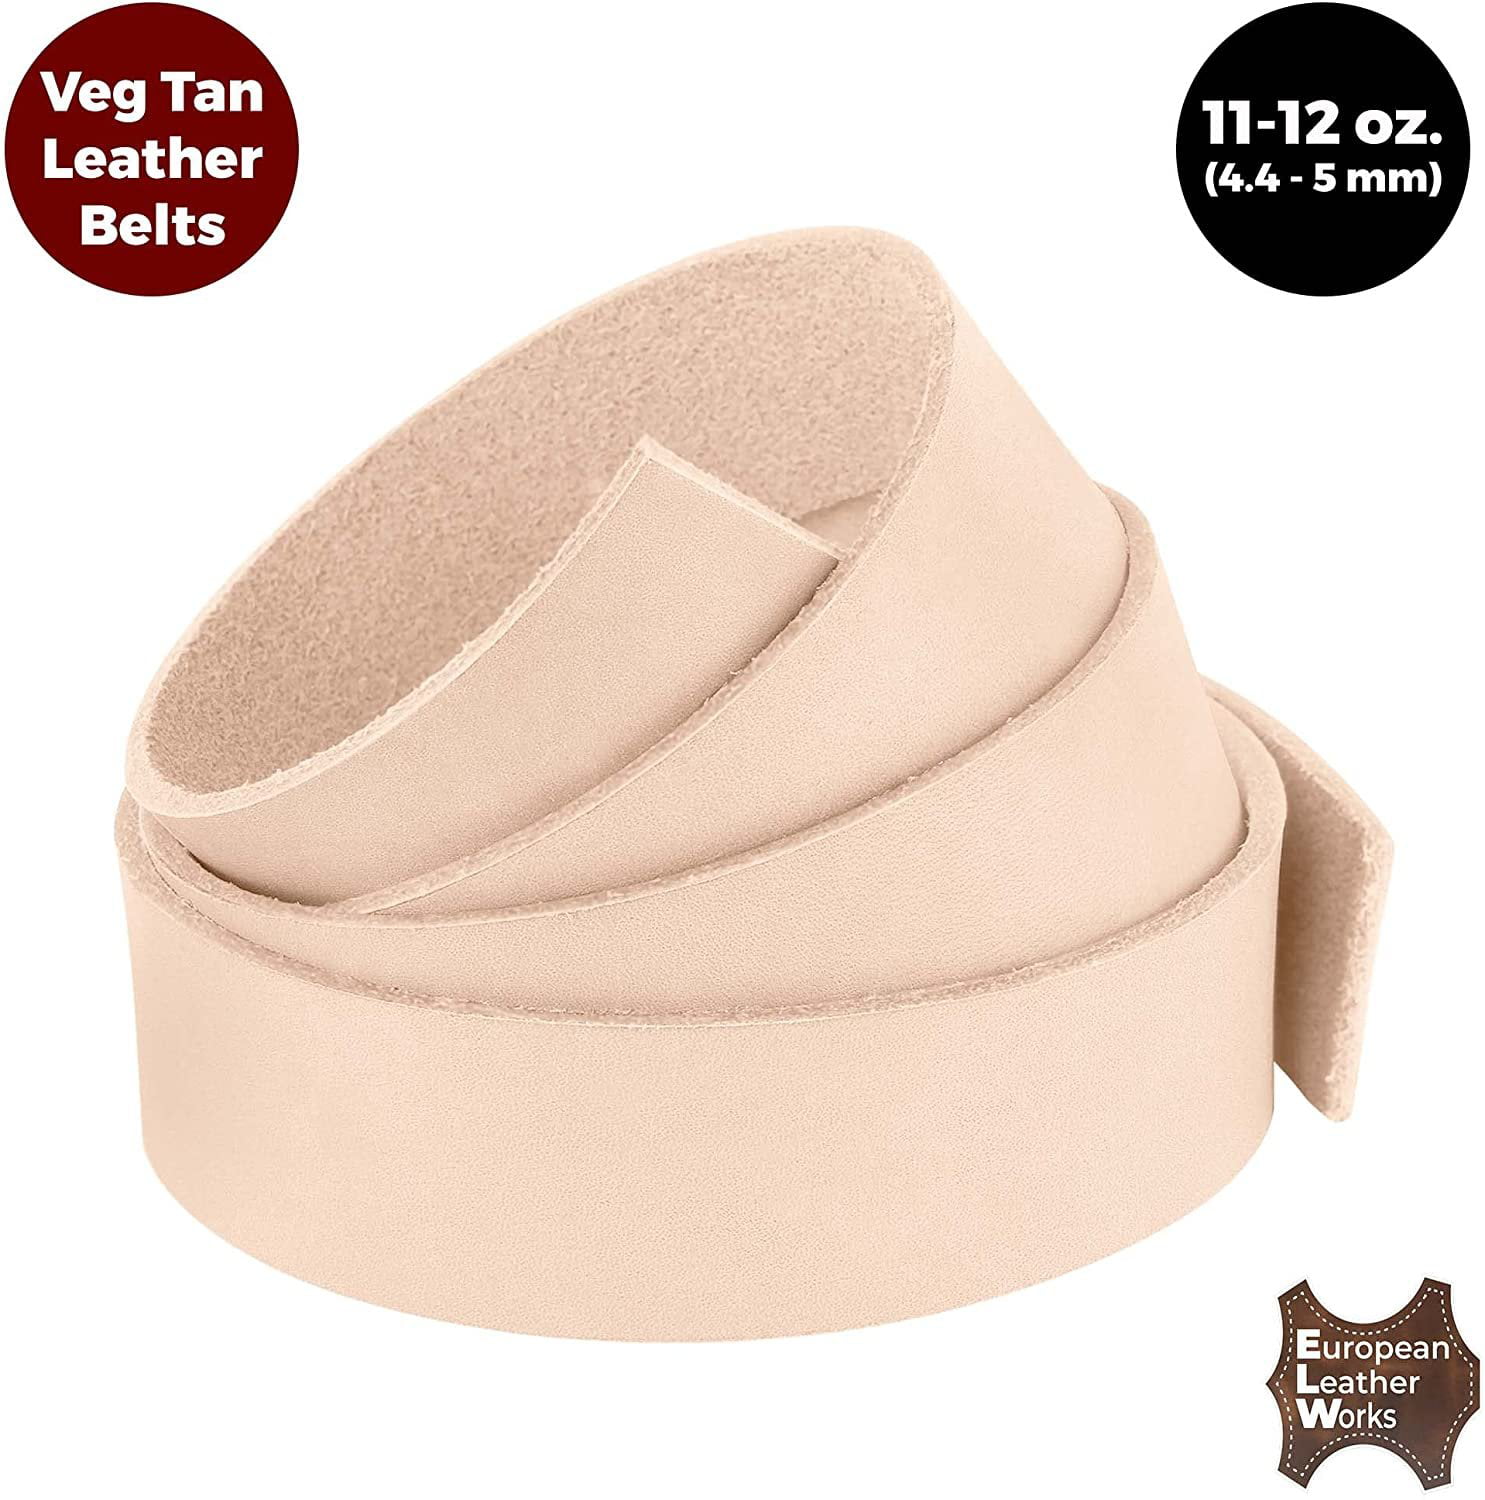 50 & 72 Length Thickness Sizes 1/2 to 4 Wide Vegetable Tan Tooling Cow Leather Belt Blanks Strips Straps 3/4oz 5/6oz 8/9oz 9/10oz 11/12oz 1mm-5mm 